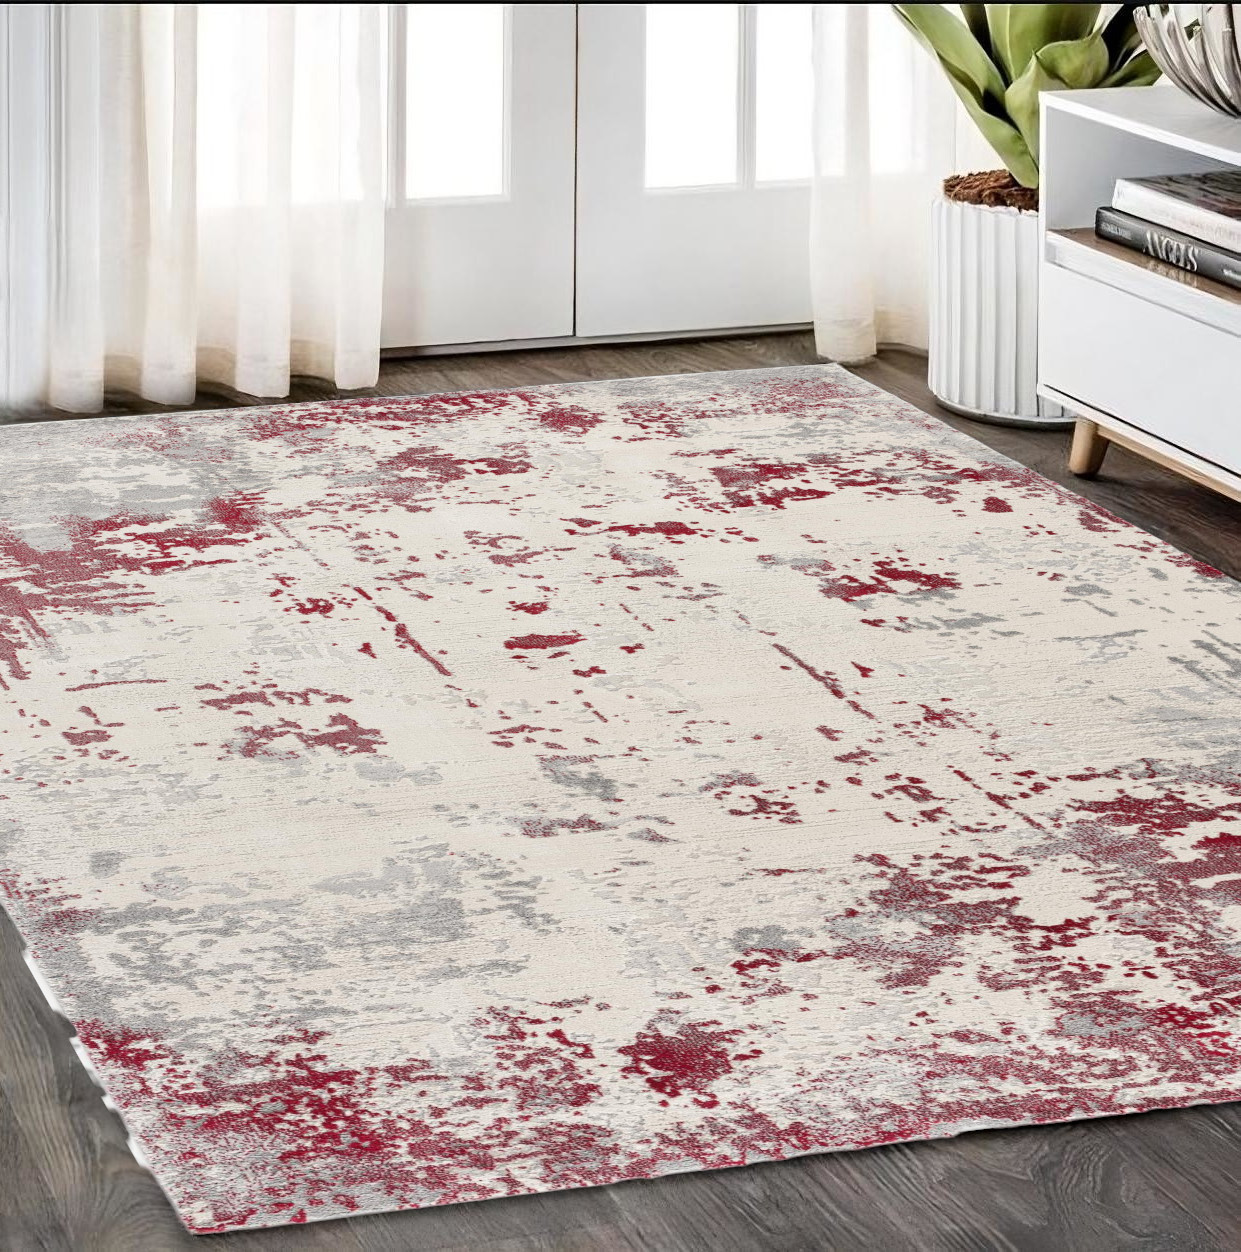 5' X 7' Red Abstract Dhurrie Area Rug-390524-1